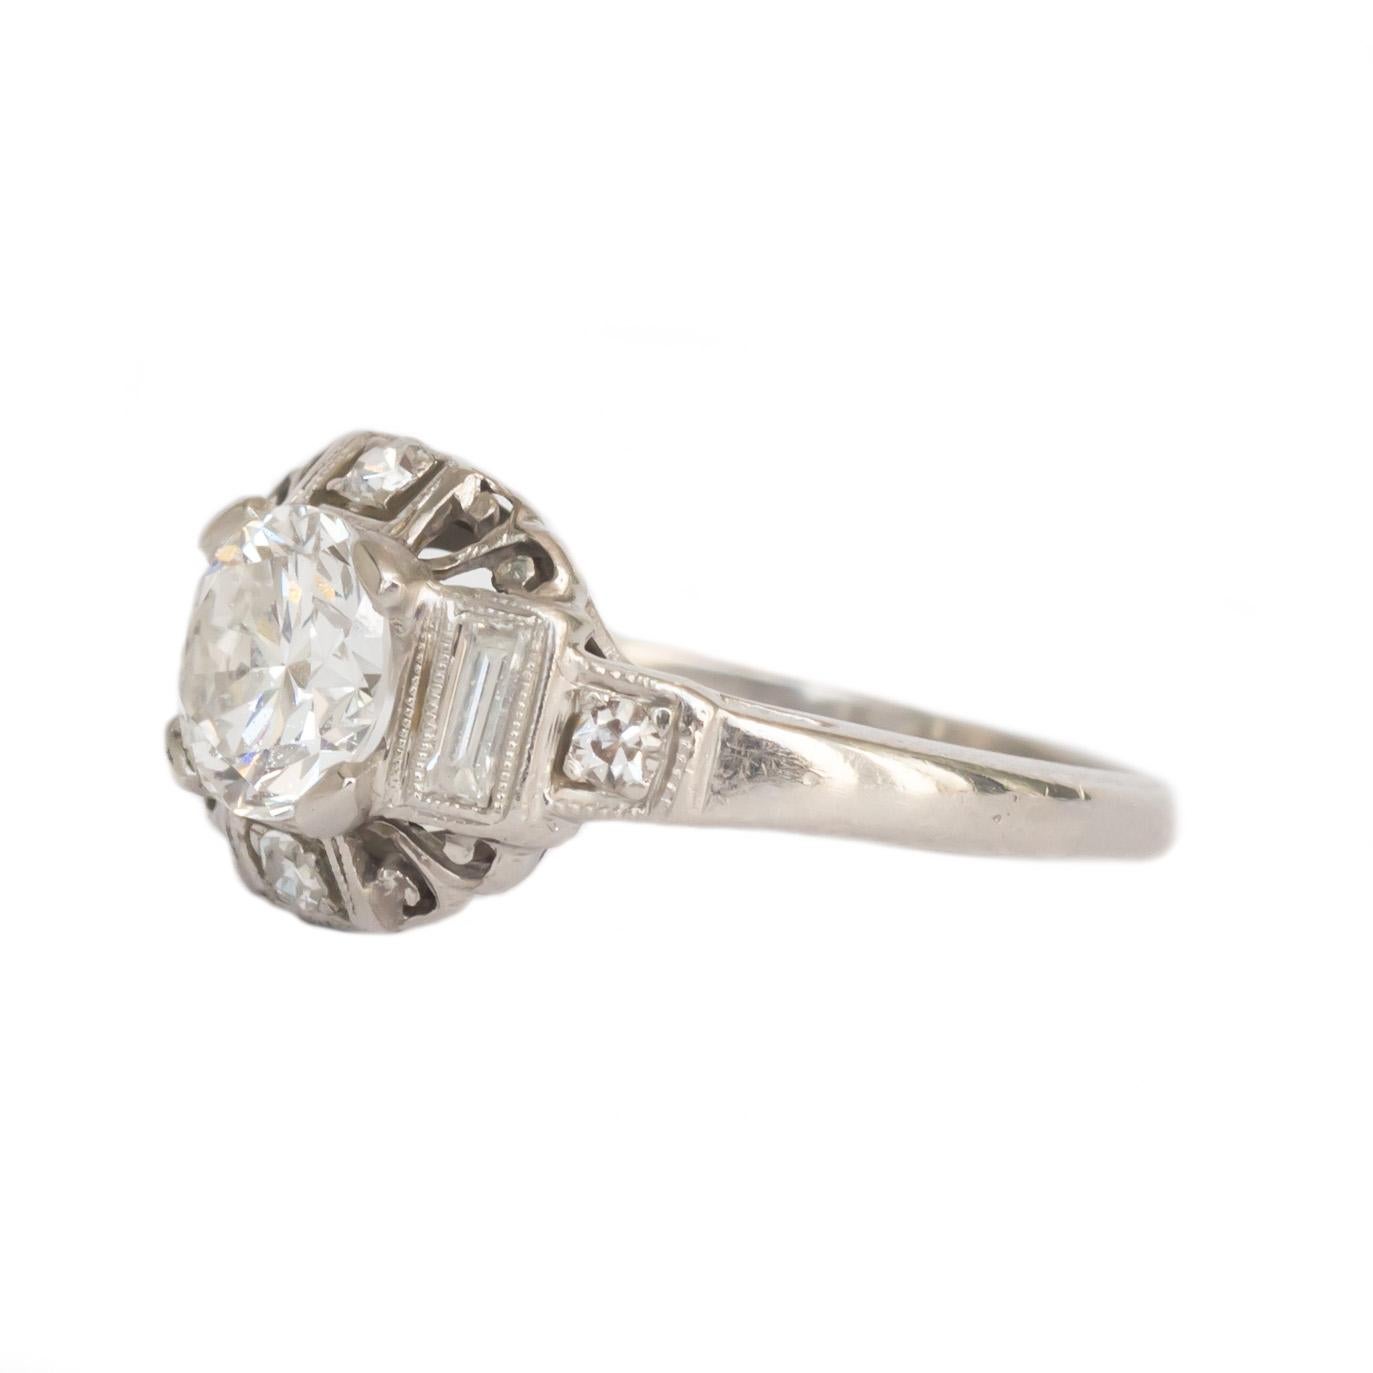 Item Details: 
Ring Size: 4.5
Metal Type: Platinum  [Tested and Hallmarked]
Weight: 3.1 grams

Center Stone Details:
Weight: .80 carat
Cut: Transitional Round
Color: G
Clarity: VS

Side Stone Details: 
Weight: .30 carat
Cut: Transitional Round,